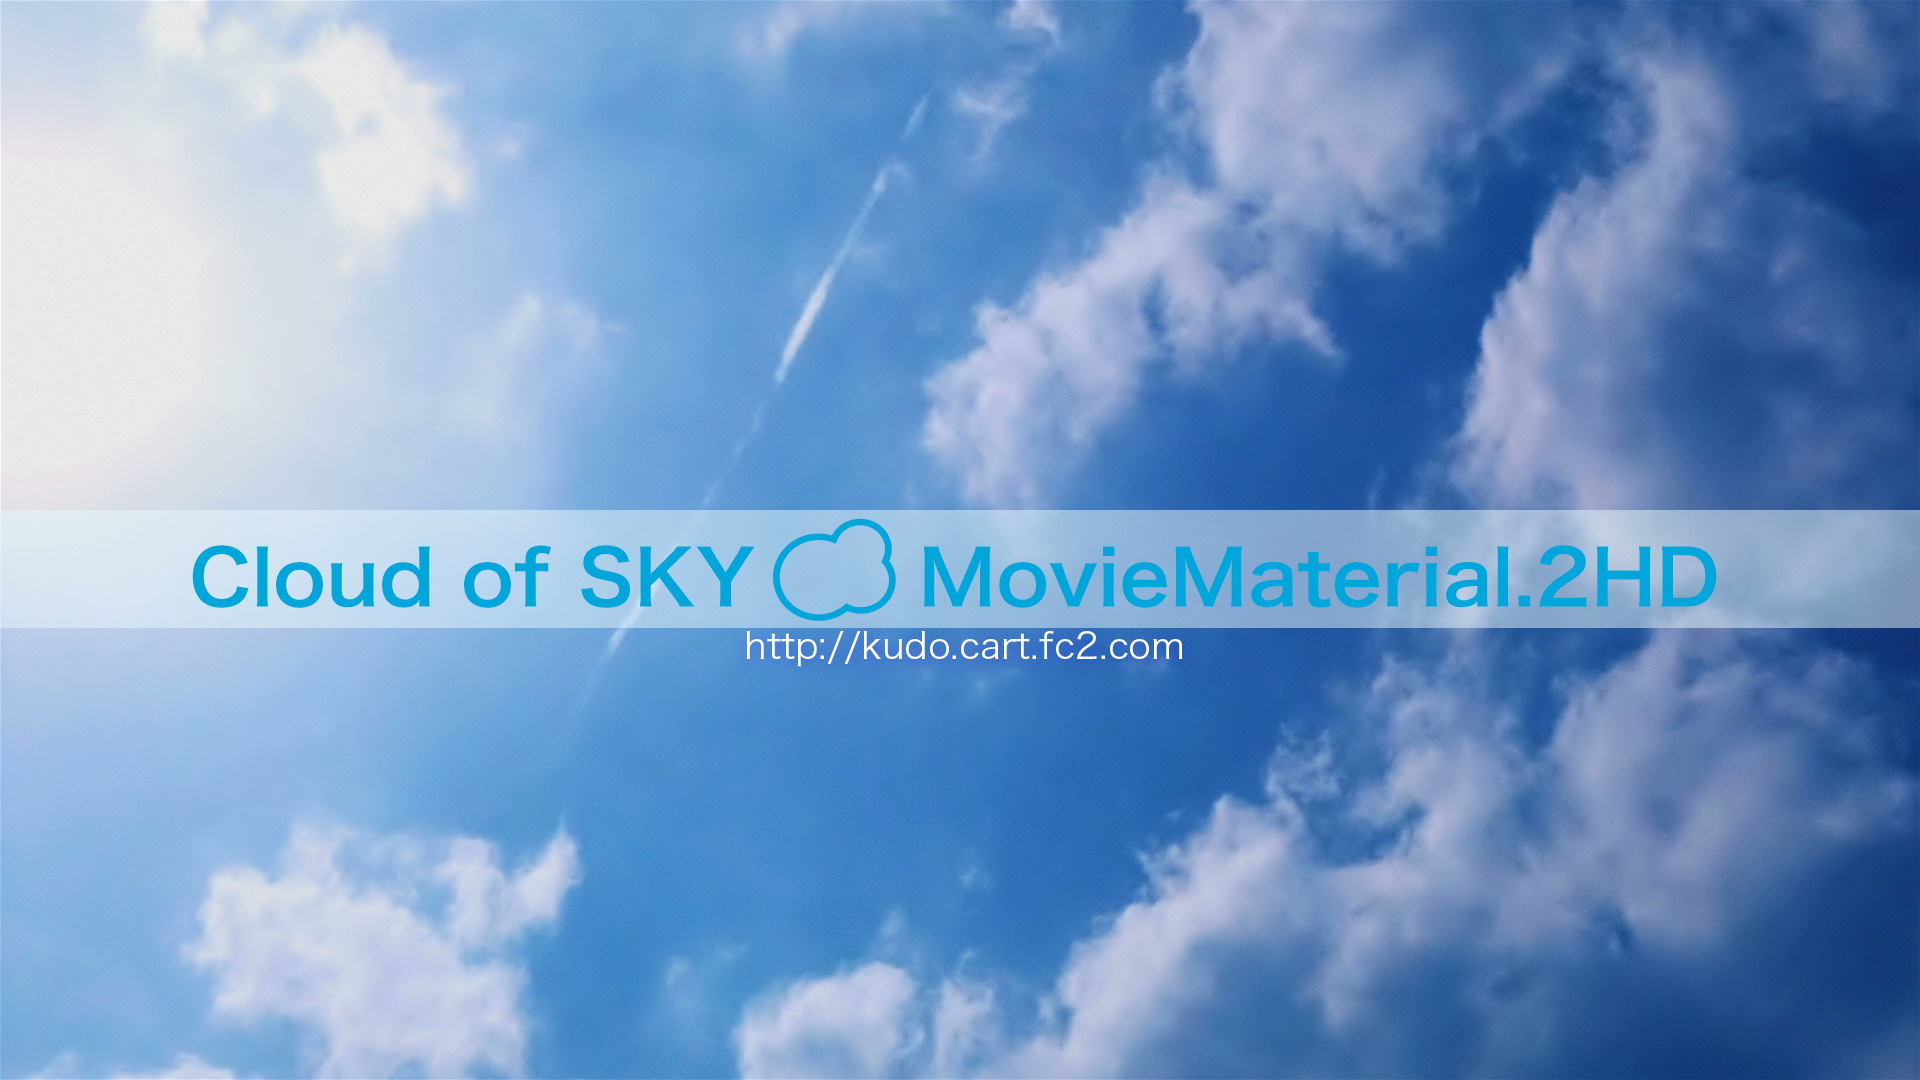 【Cloud of SKY MovieMaterial.HDSET】 ロイヤリティフリー フルハイビジョン動画素材集 Image.1